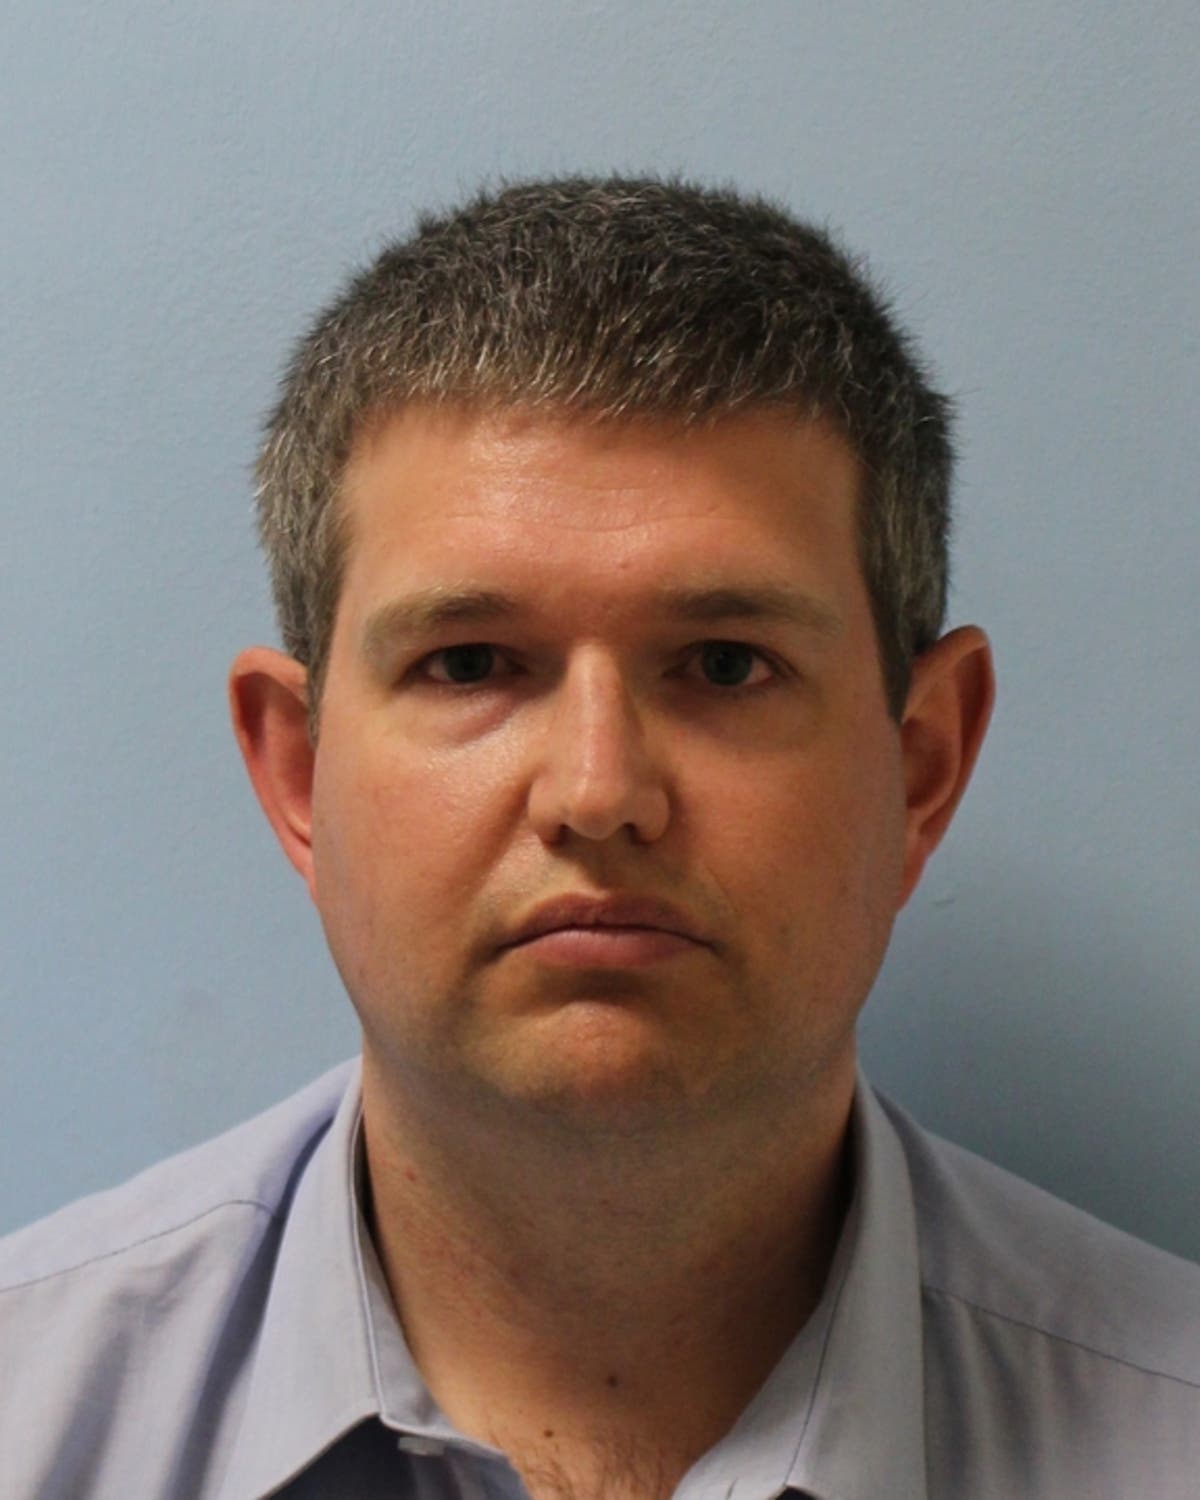 National Crime Agency officer jailed for using work computer to look at child sex images